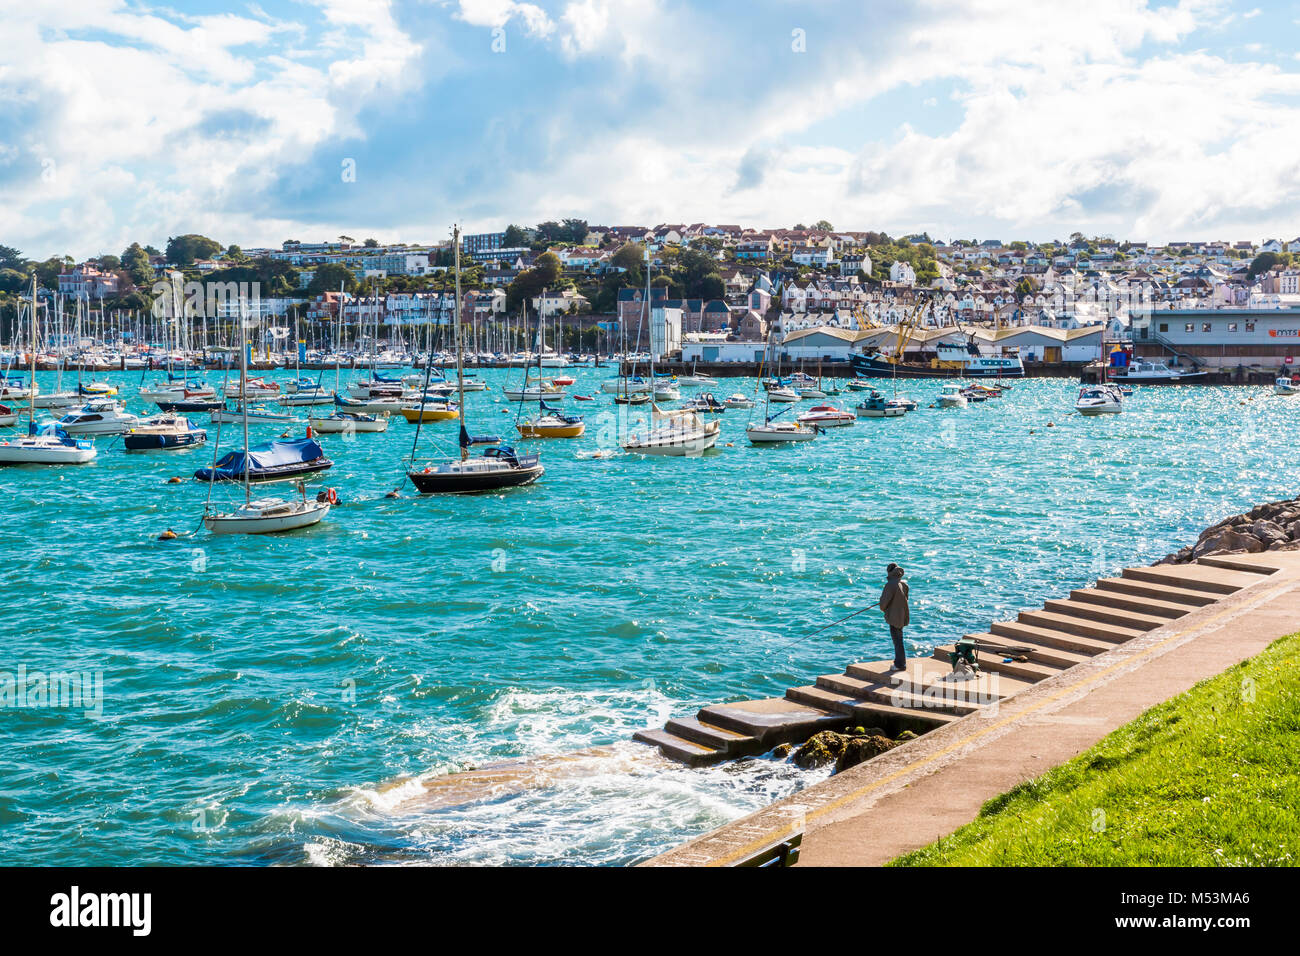 Yachts in harbour at Brixham, South Devon in the UK. Stock Photo